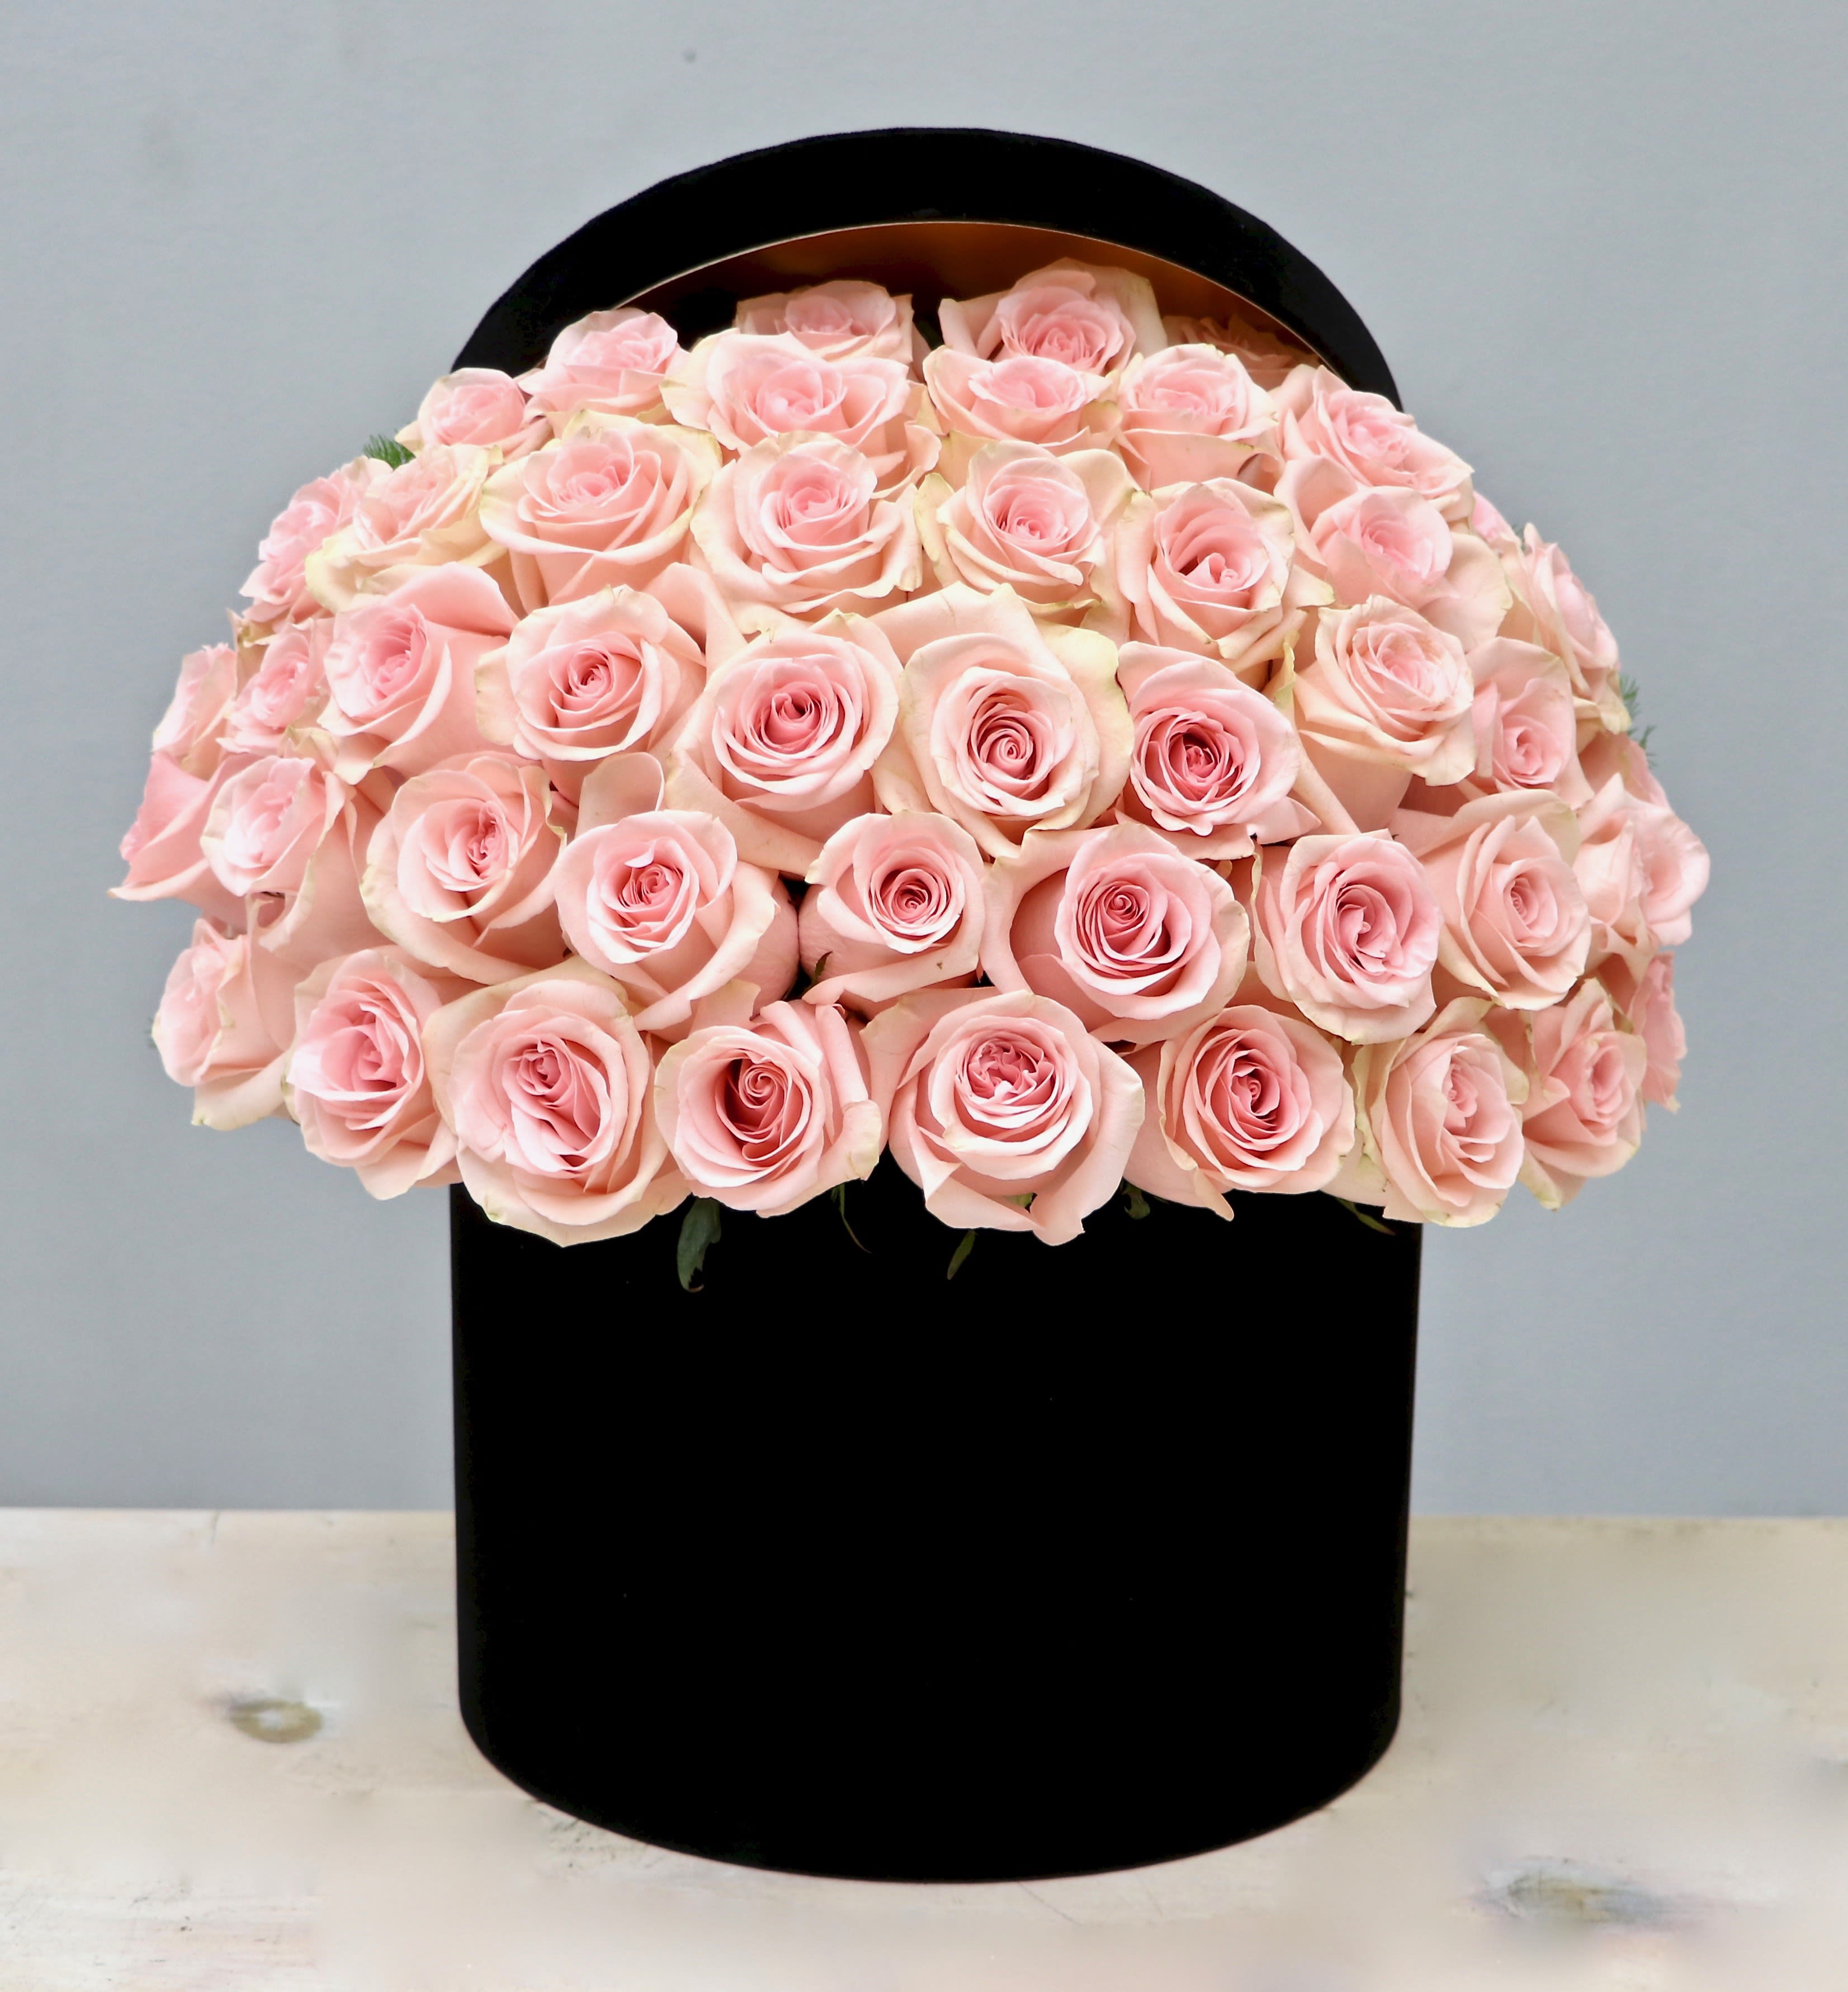 50 Pink Roses Black Hat Box- My Glendale Florist  - 50 Premium Ecuadorian pink roses perfectly arranged in our new hatbox! Make sure to upgrade to deluxe(75 roses) or premium(100 roses) for more roses!!  